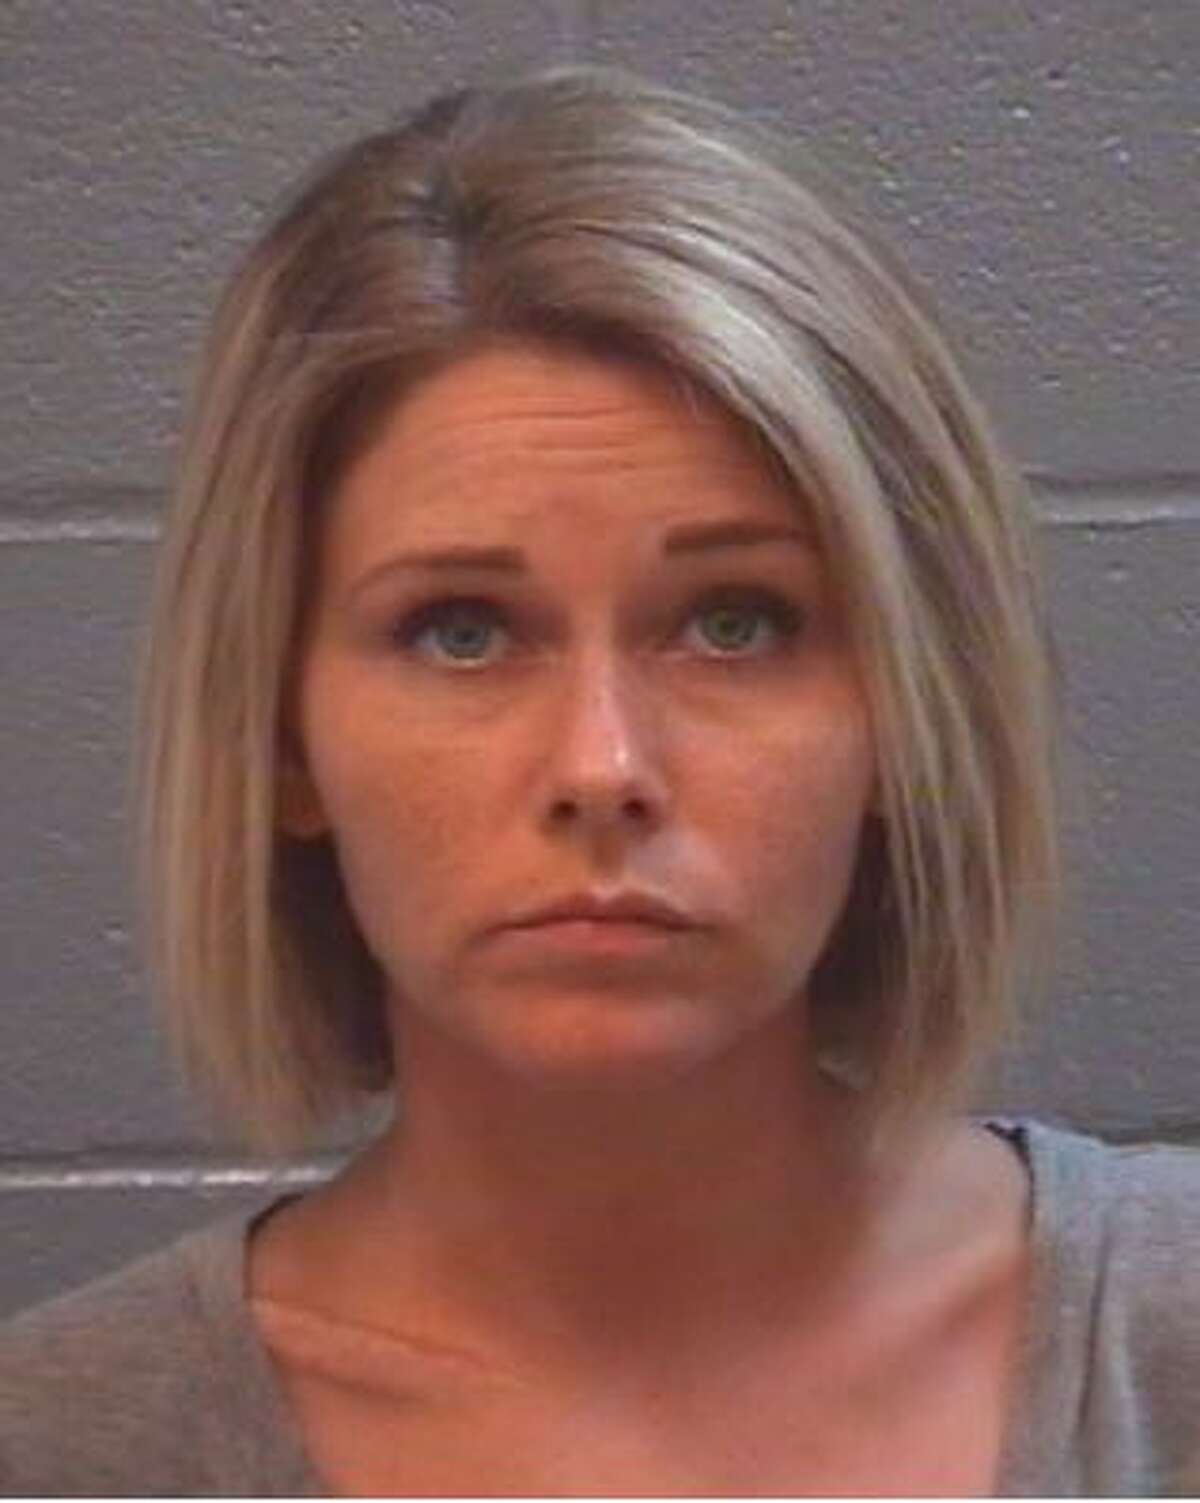 Rachel Lynn Lehnardt allegedly hosted a naked Twister party for her underage daughter and her friends. The party also led to an alleged rape, sex in a bathroom, sex toys in the living room and more. Lehnardt is being charged with two counts of contributing to the delinquency of a minor.